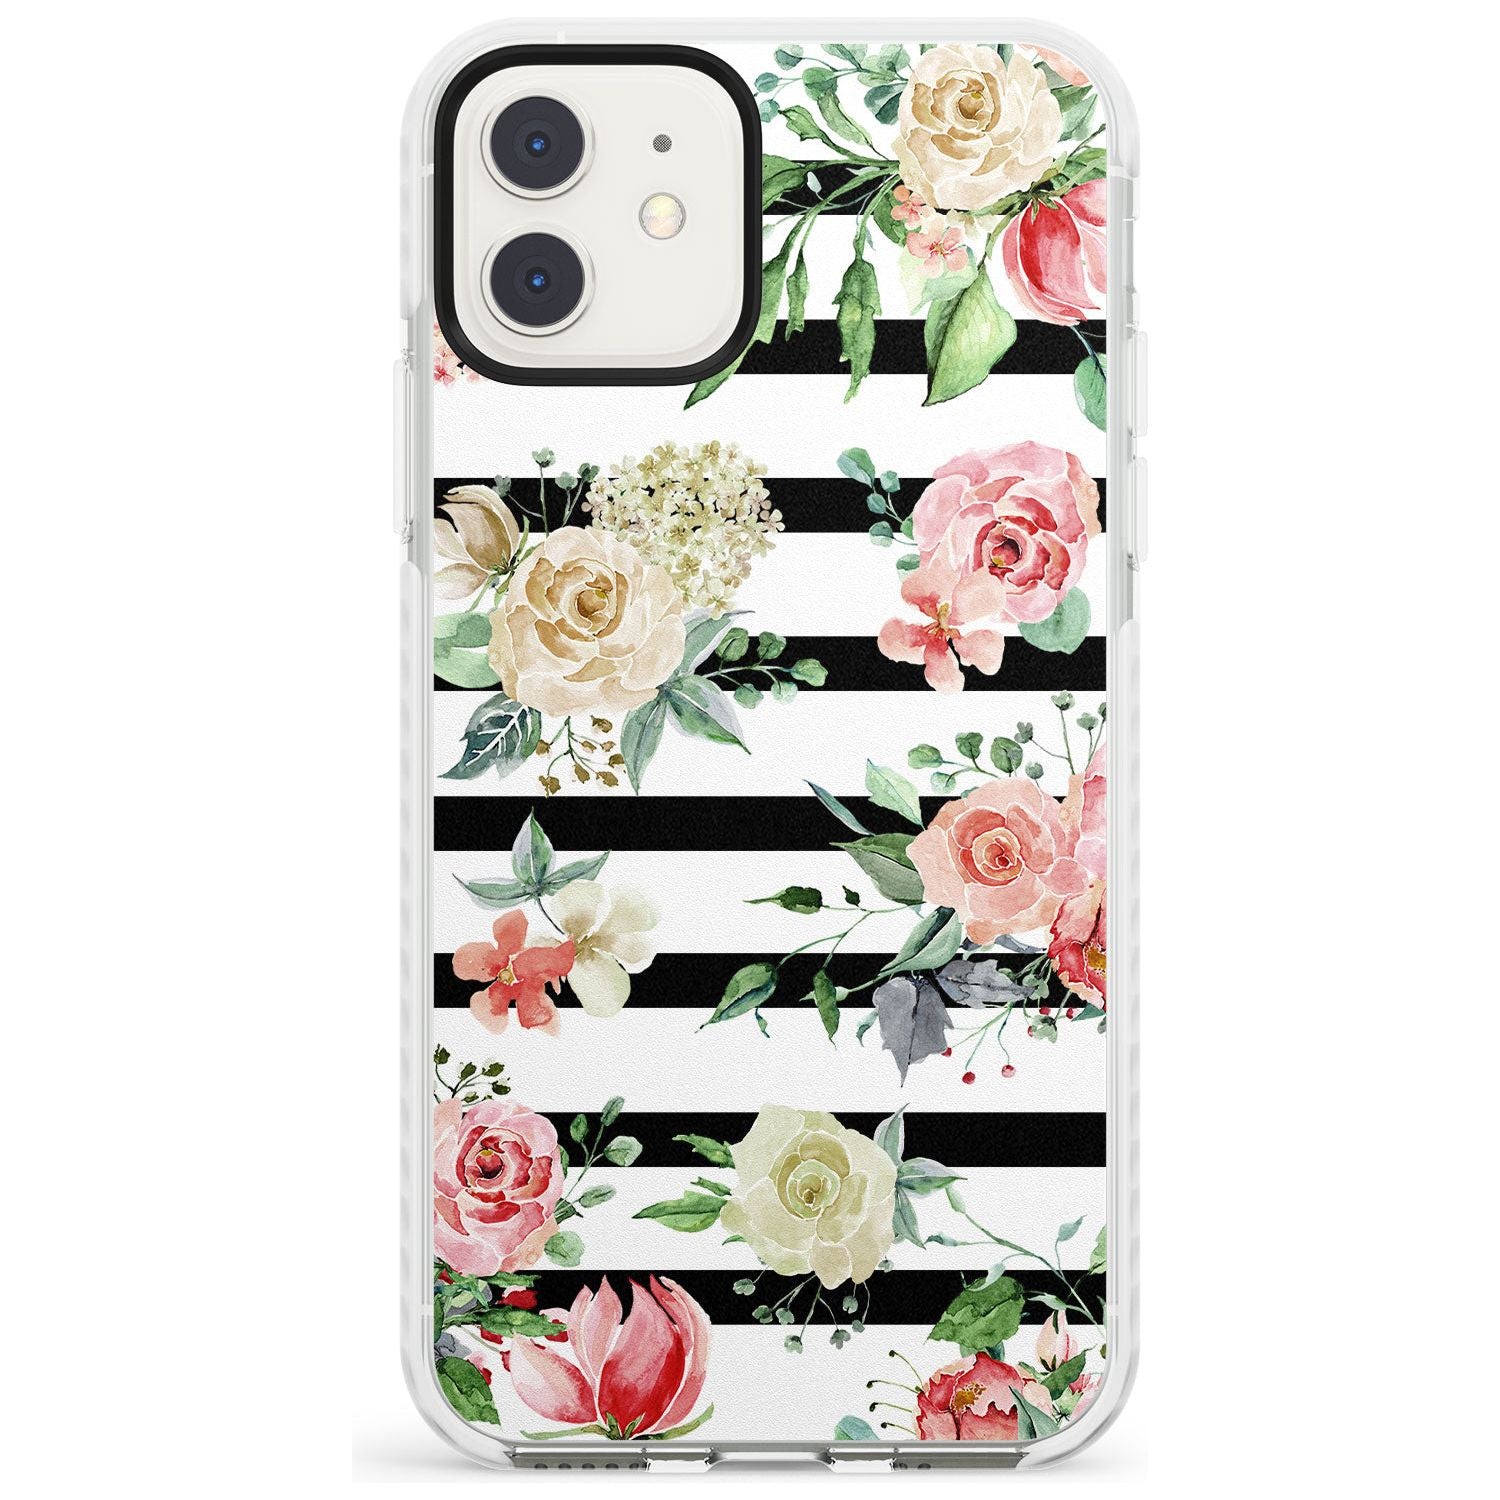 Bold Stripes & Flower Pattern Impact Phone Case for iPhone 11